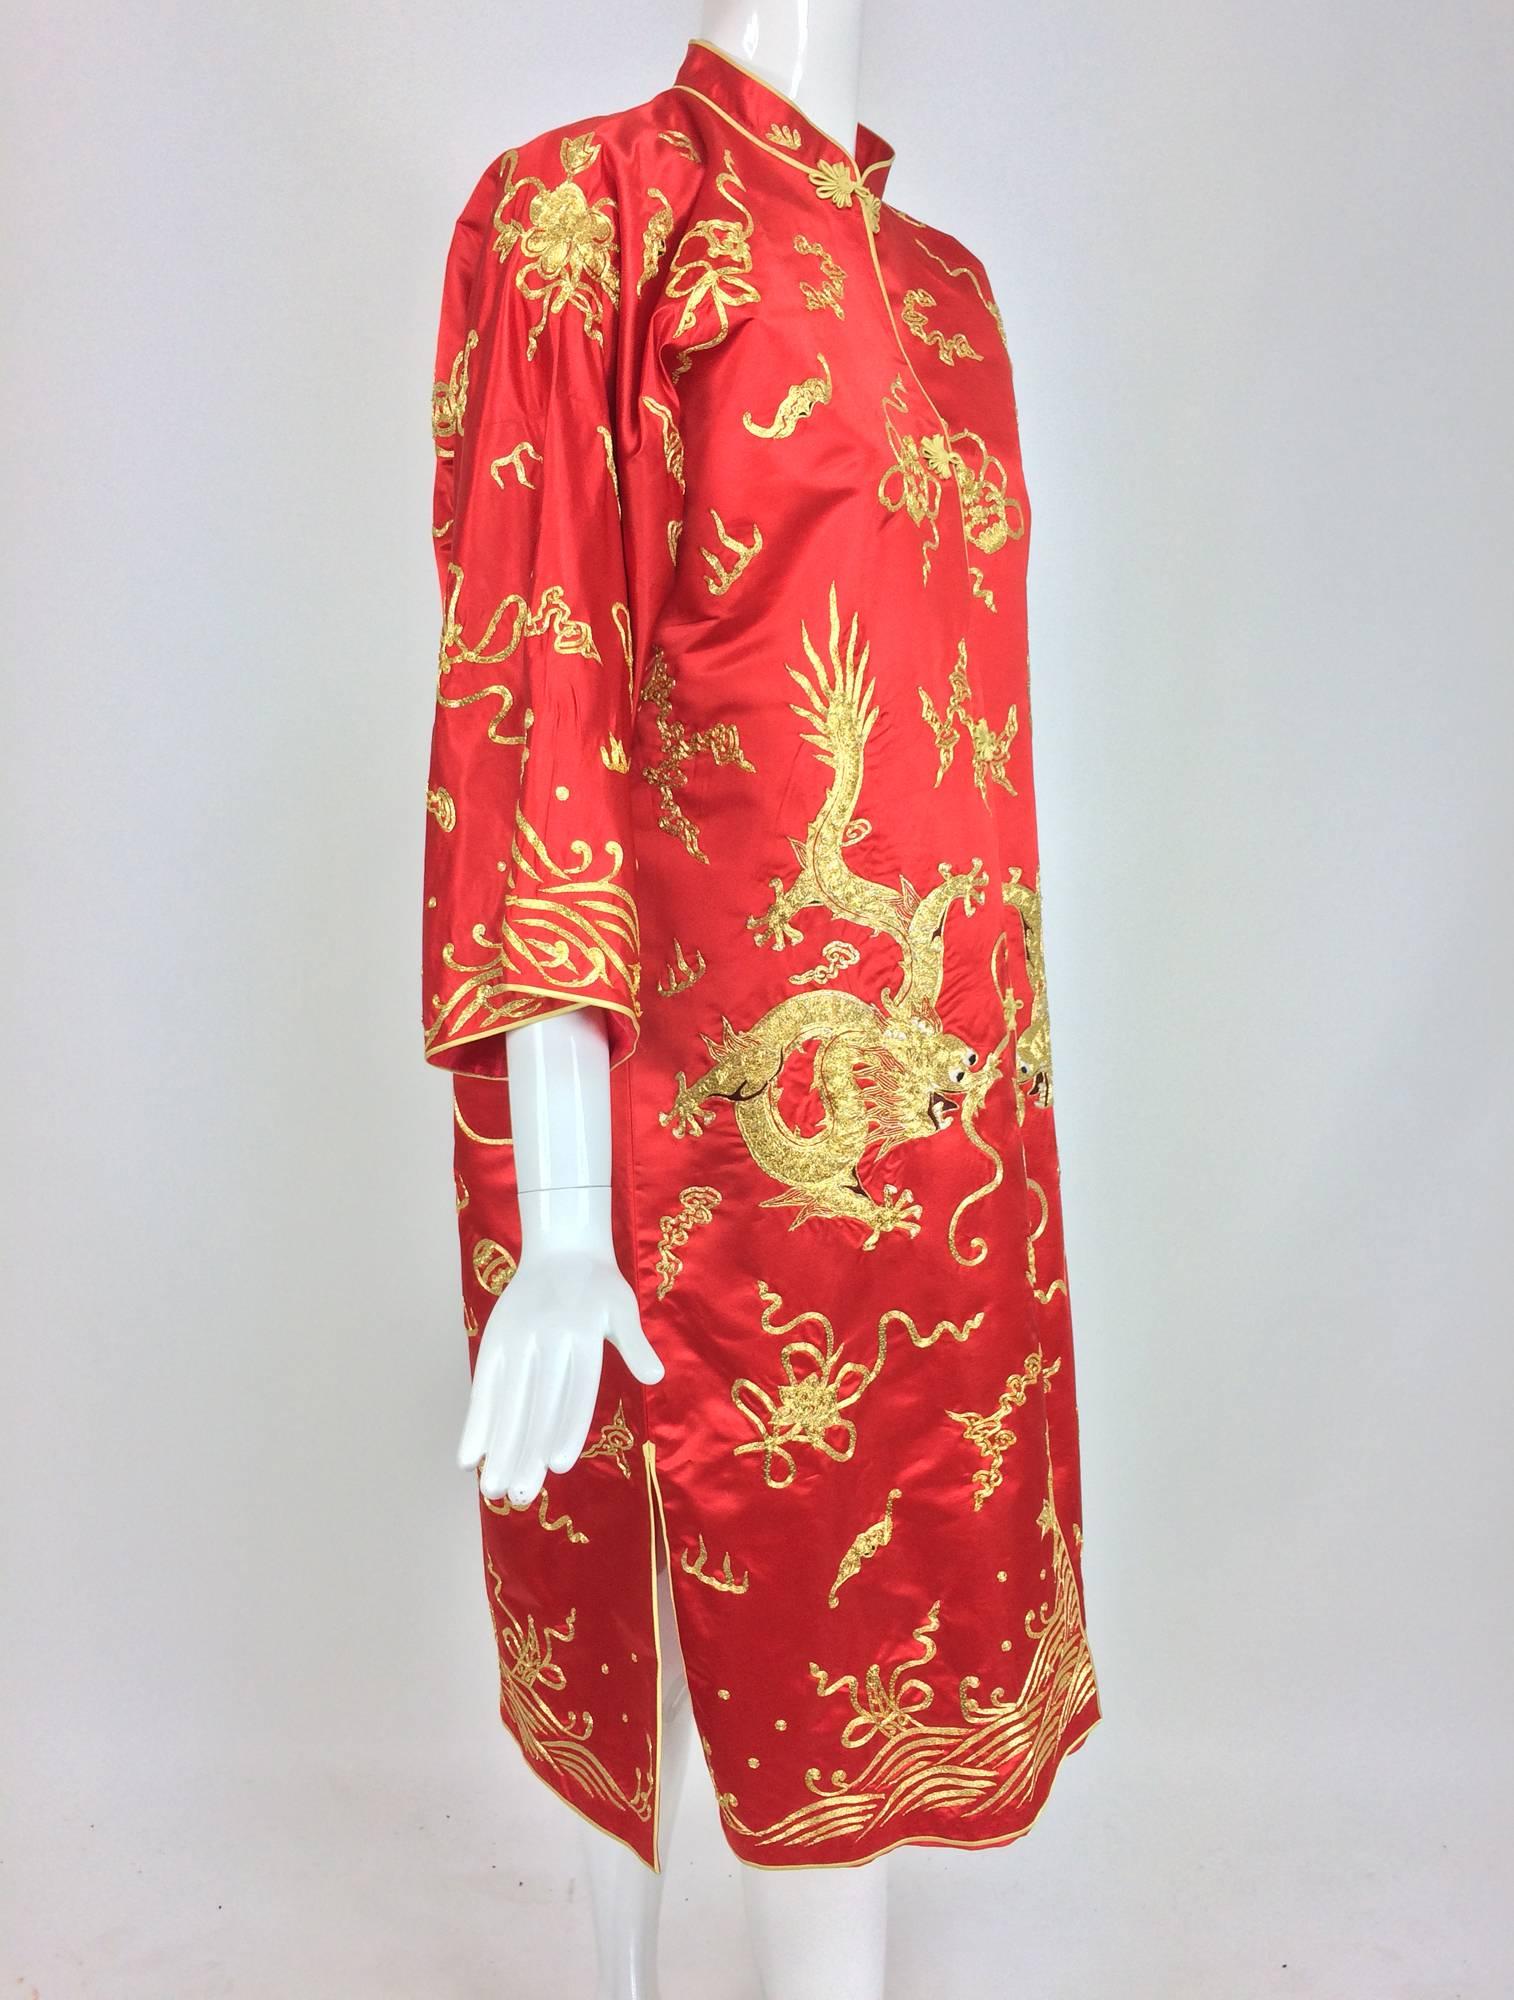 Red silk hand embroidered Golden dragon coat purchased in China in 1978...A beautiful coat with exquisite embroidery, featuring a 5 clawed dragon, during the Ming and Qin dynasty, the five-clawed dragon was strictly reserved for use by the Emperor